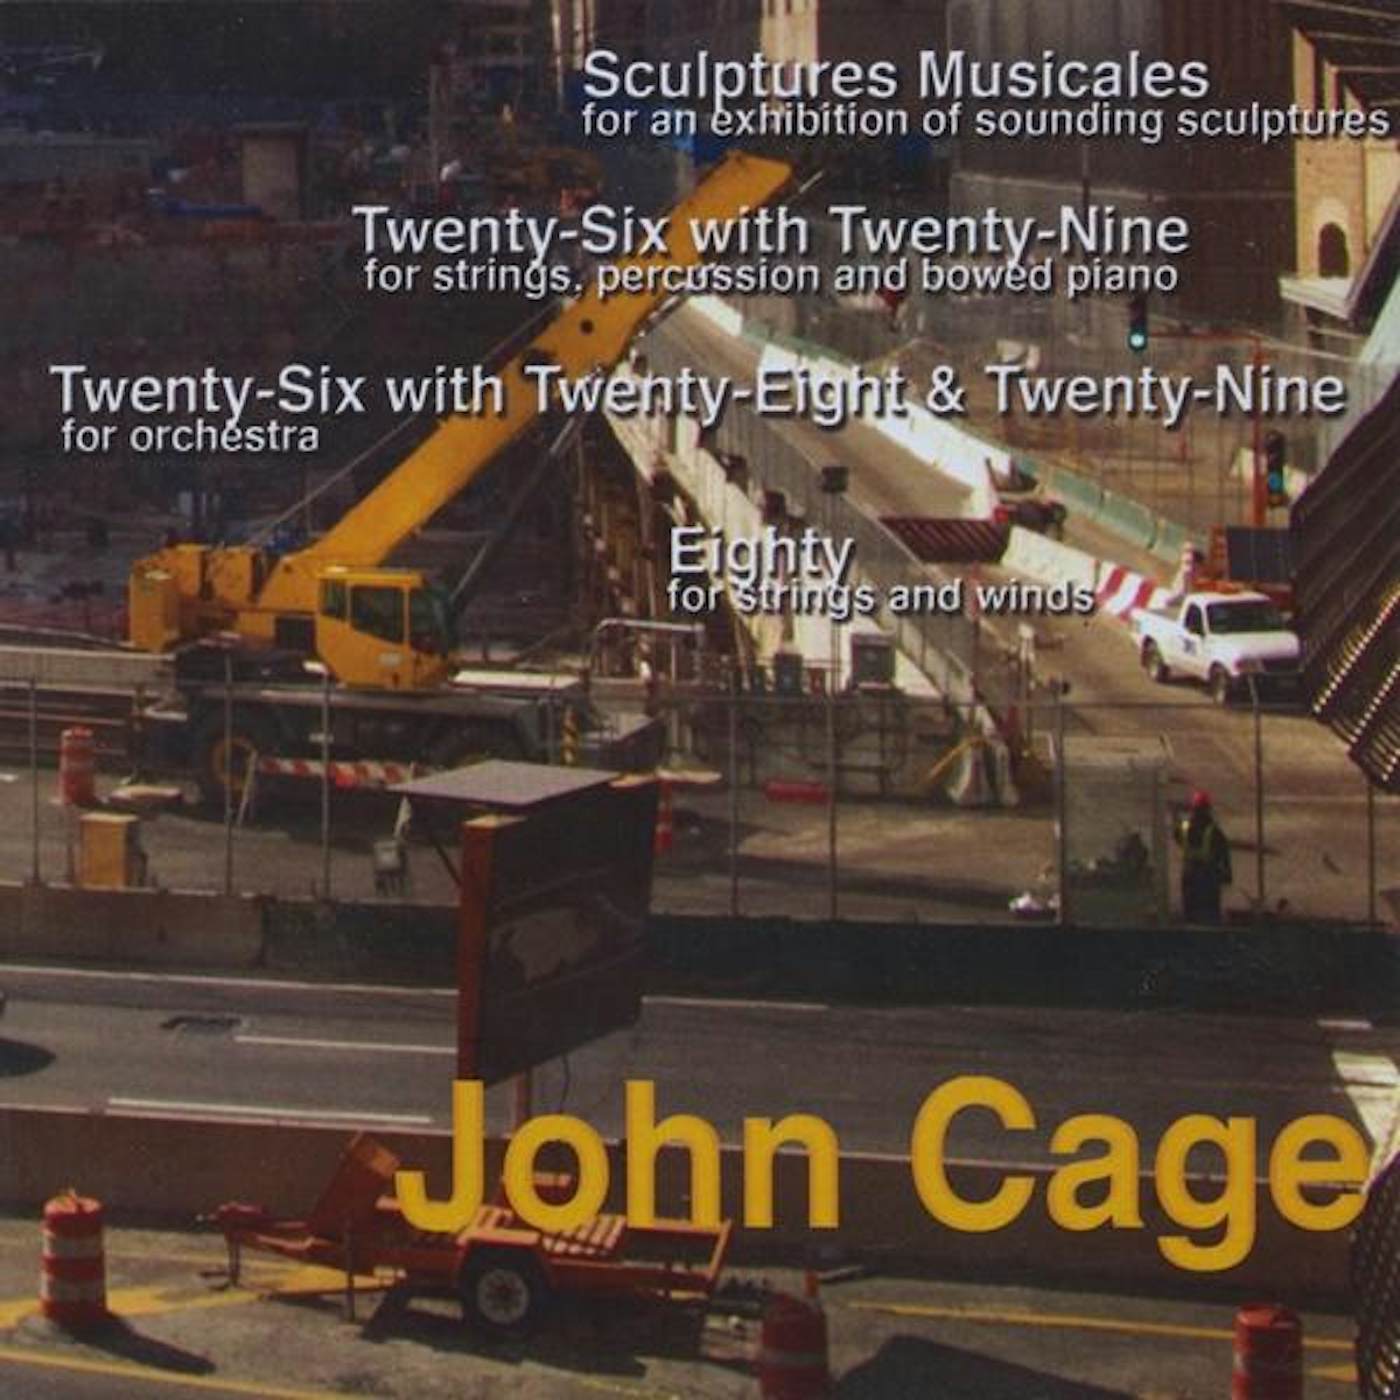 John Cage SCULPTURES MUSICALES CD